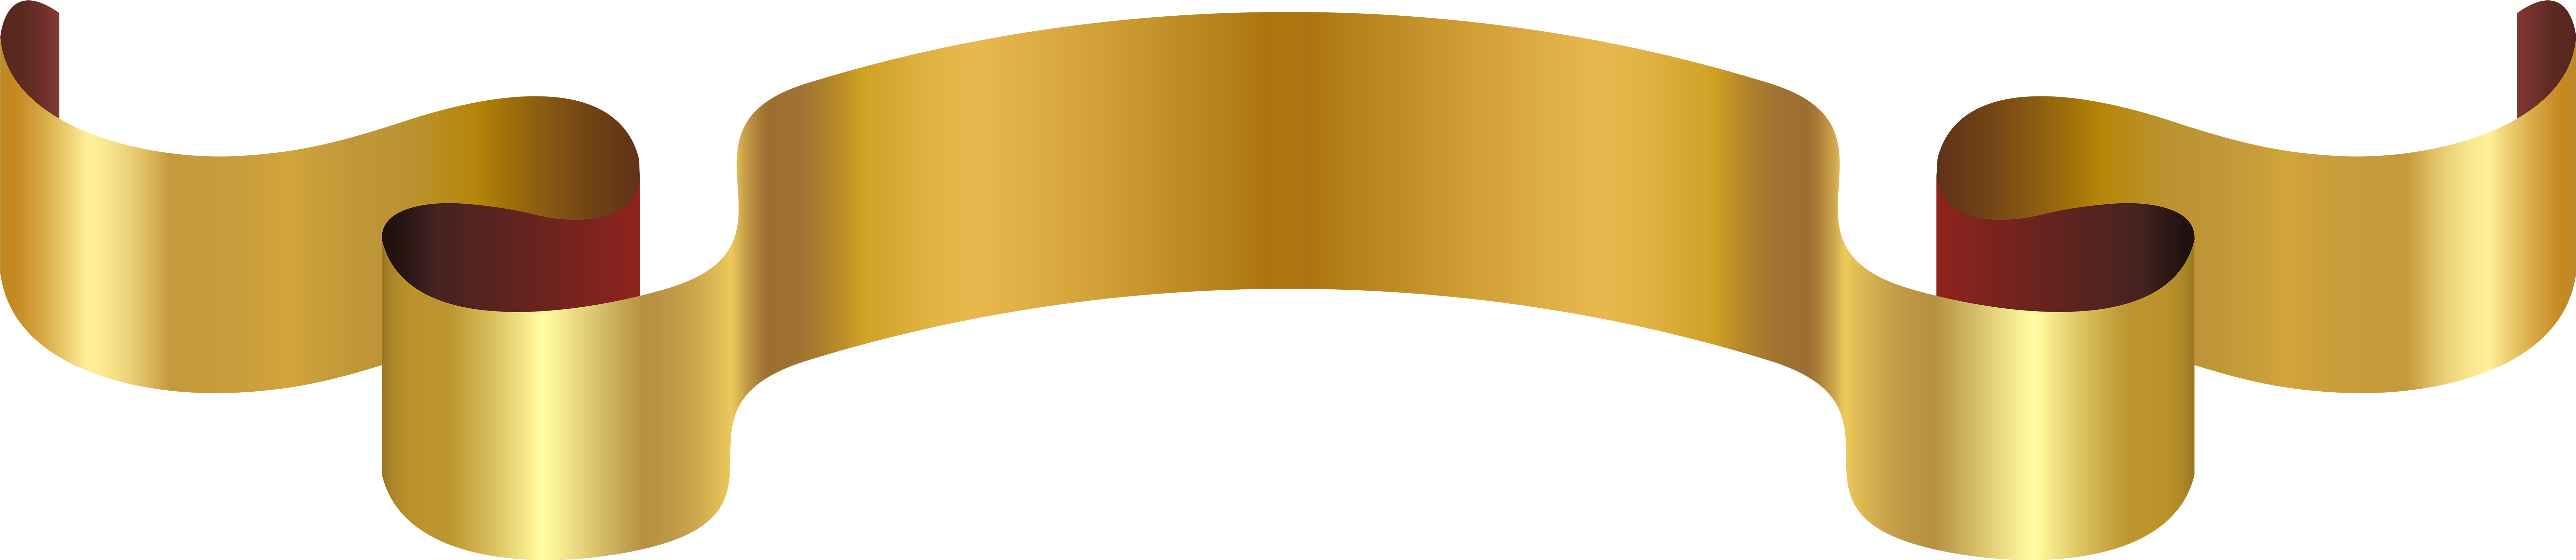 A Gold Ribbon On A Black Background